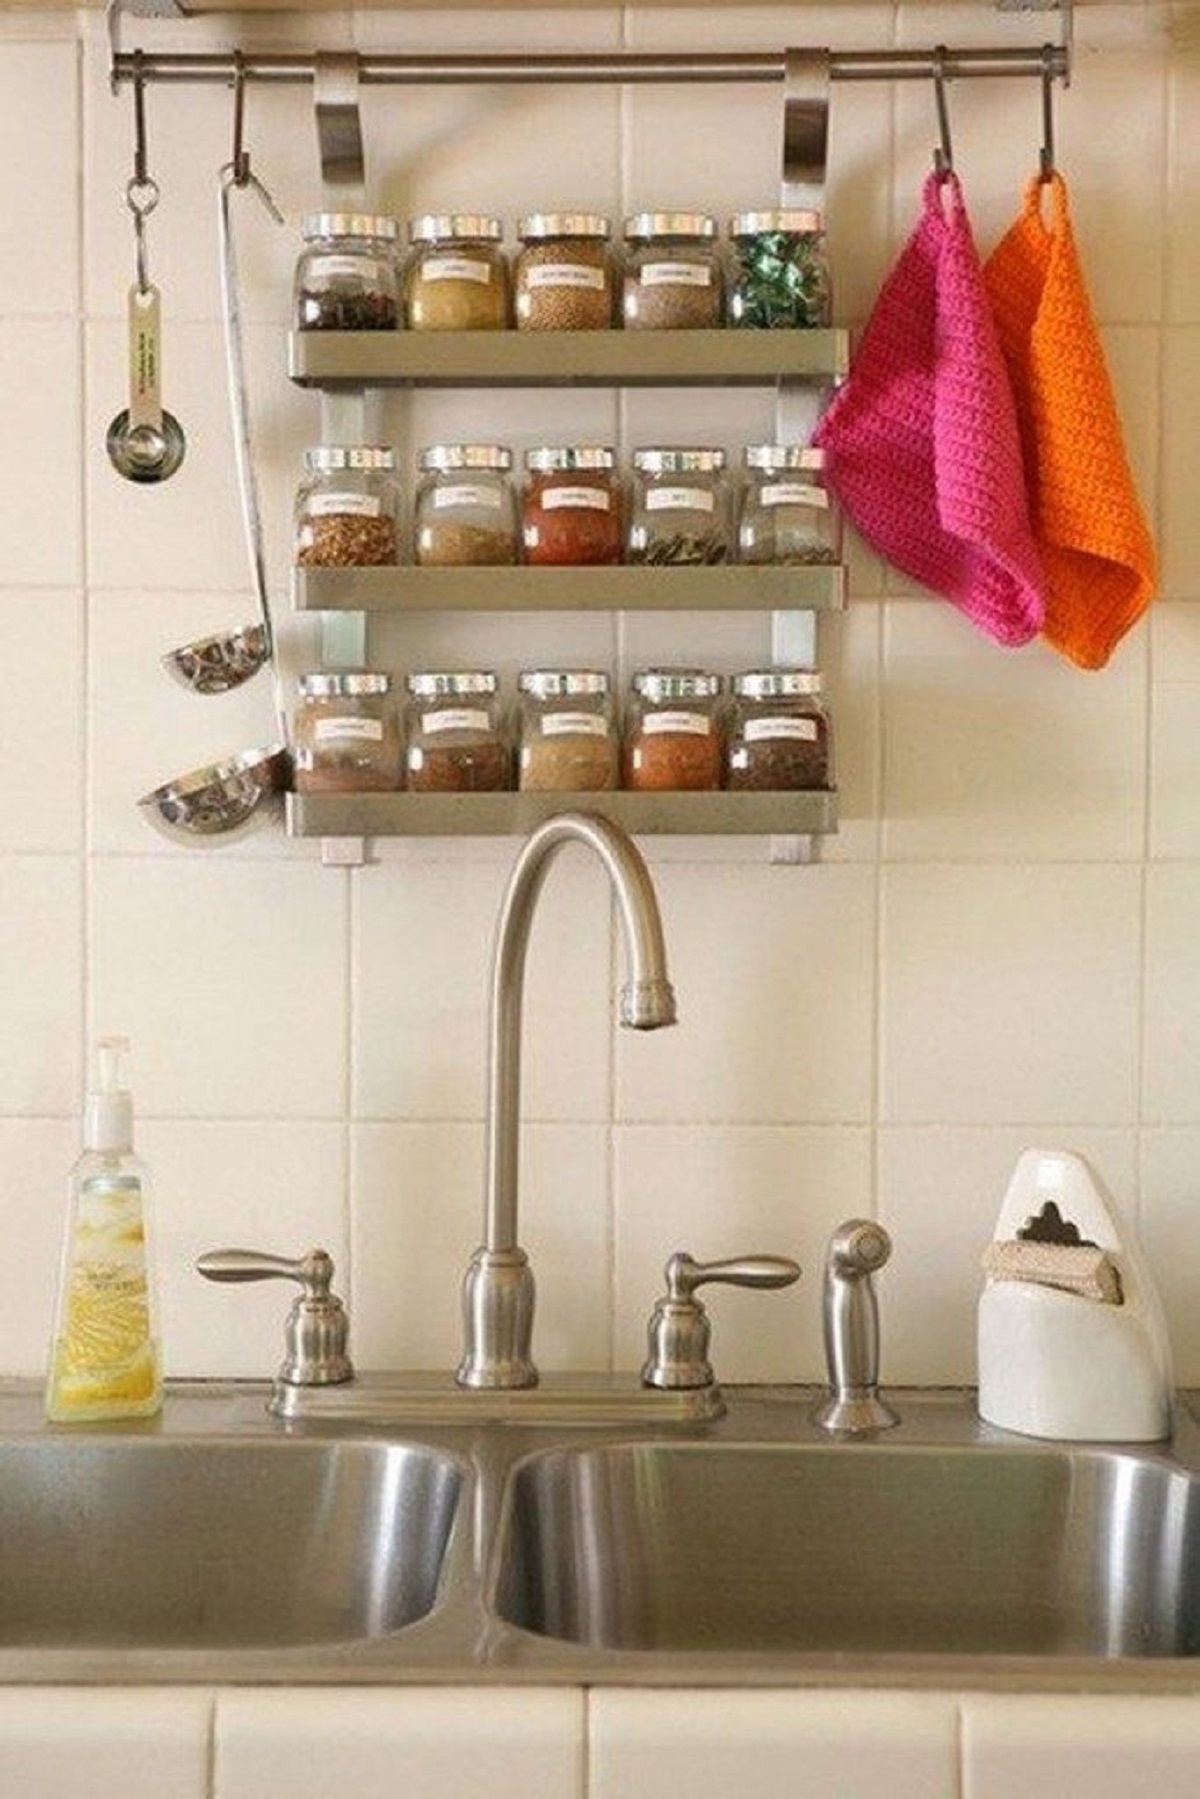 Stainless Steel Spice Rack - Foter